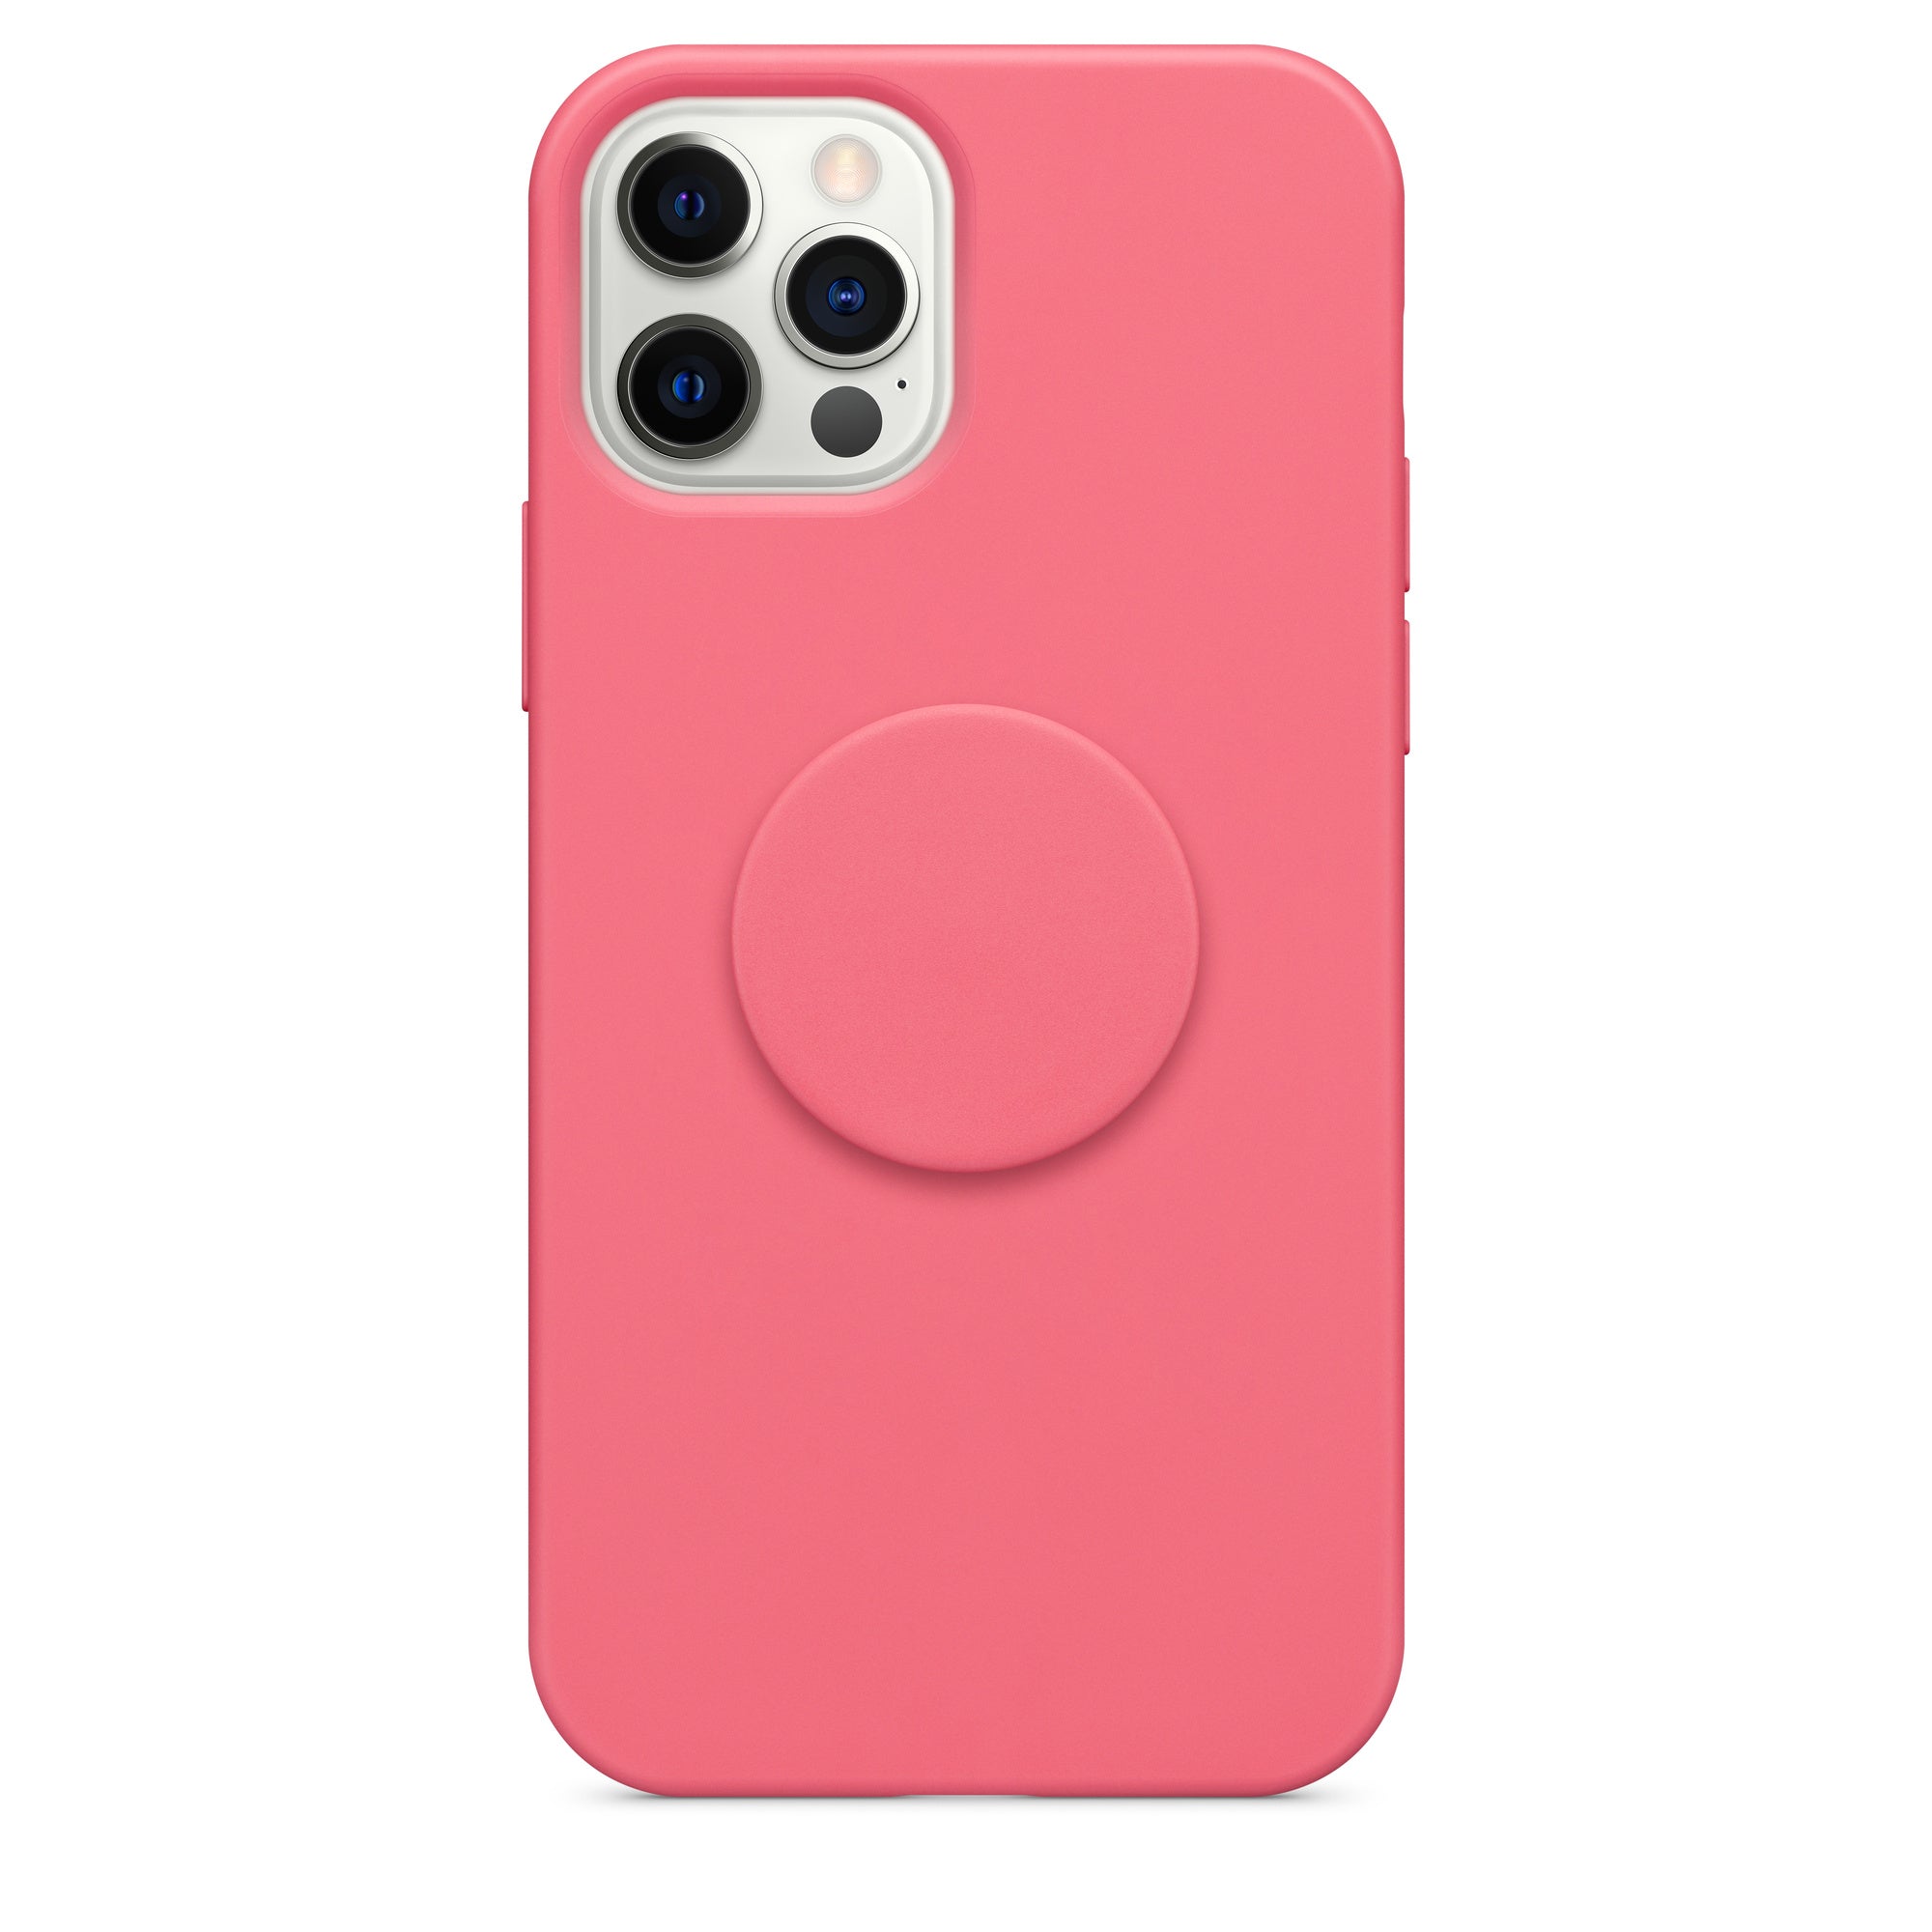 OtterBox + POP Ultra Slim Soft Touch Case for Apple iPhone 12/12 Pro - Tea Rose Pink (New)